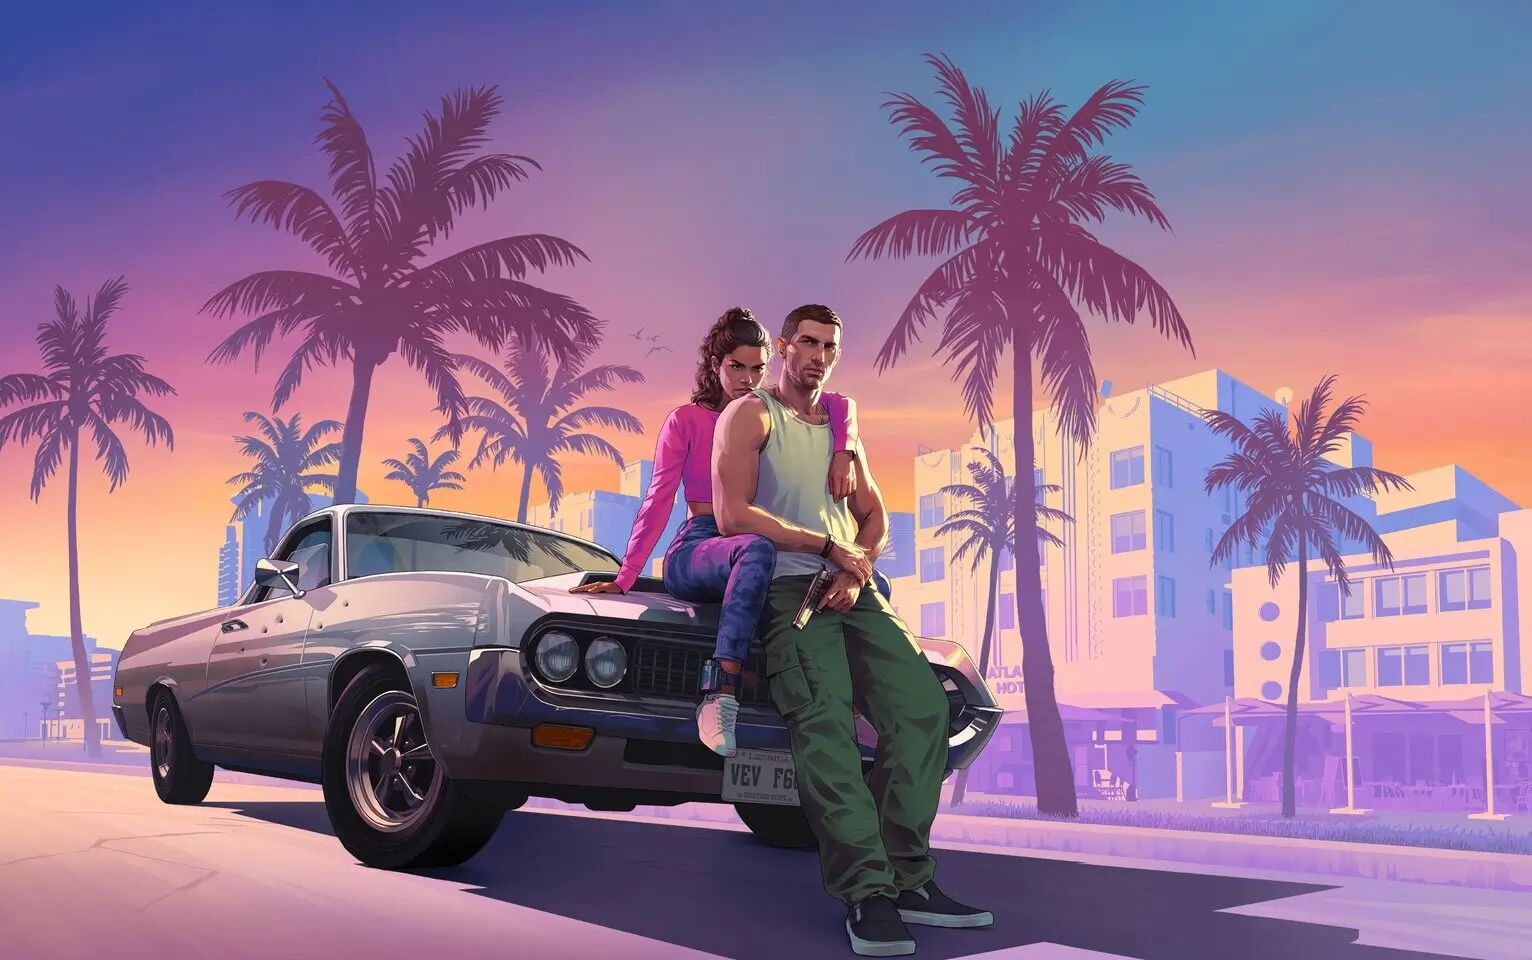 GTA 6 Trailer released but no PC release timeline